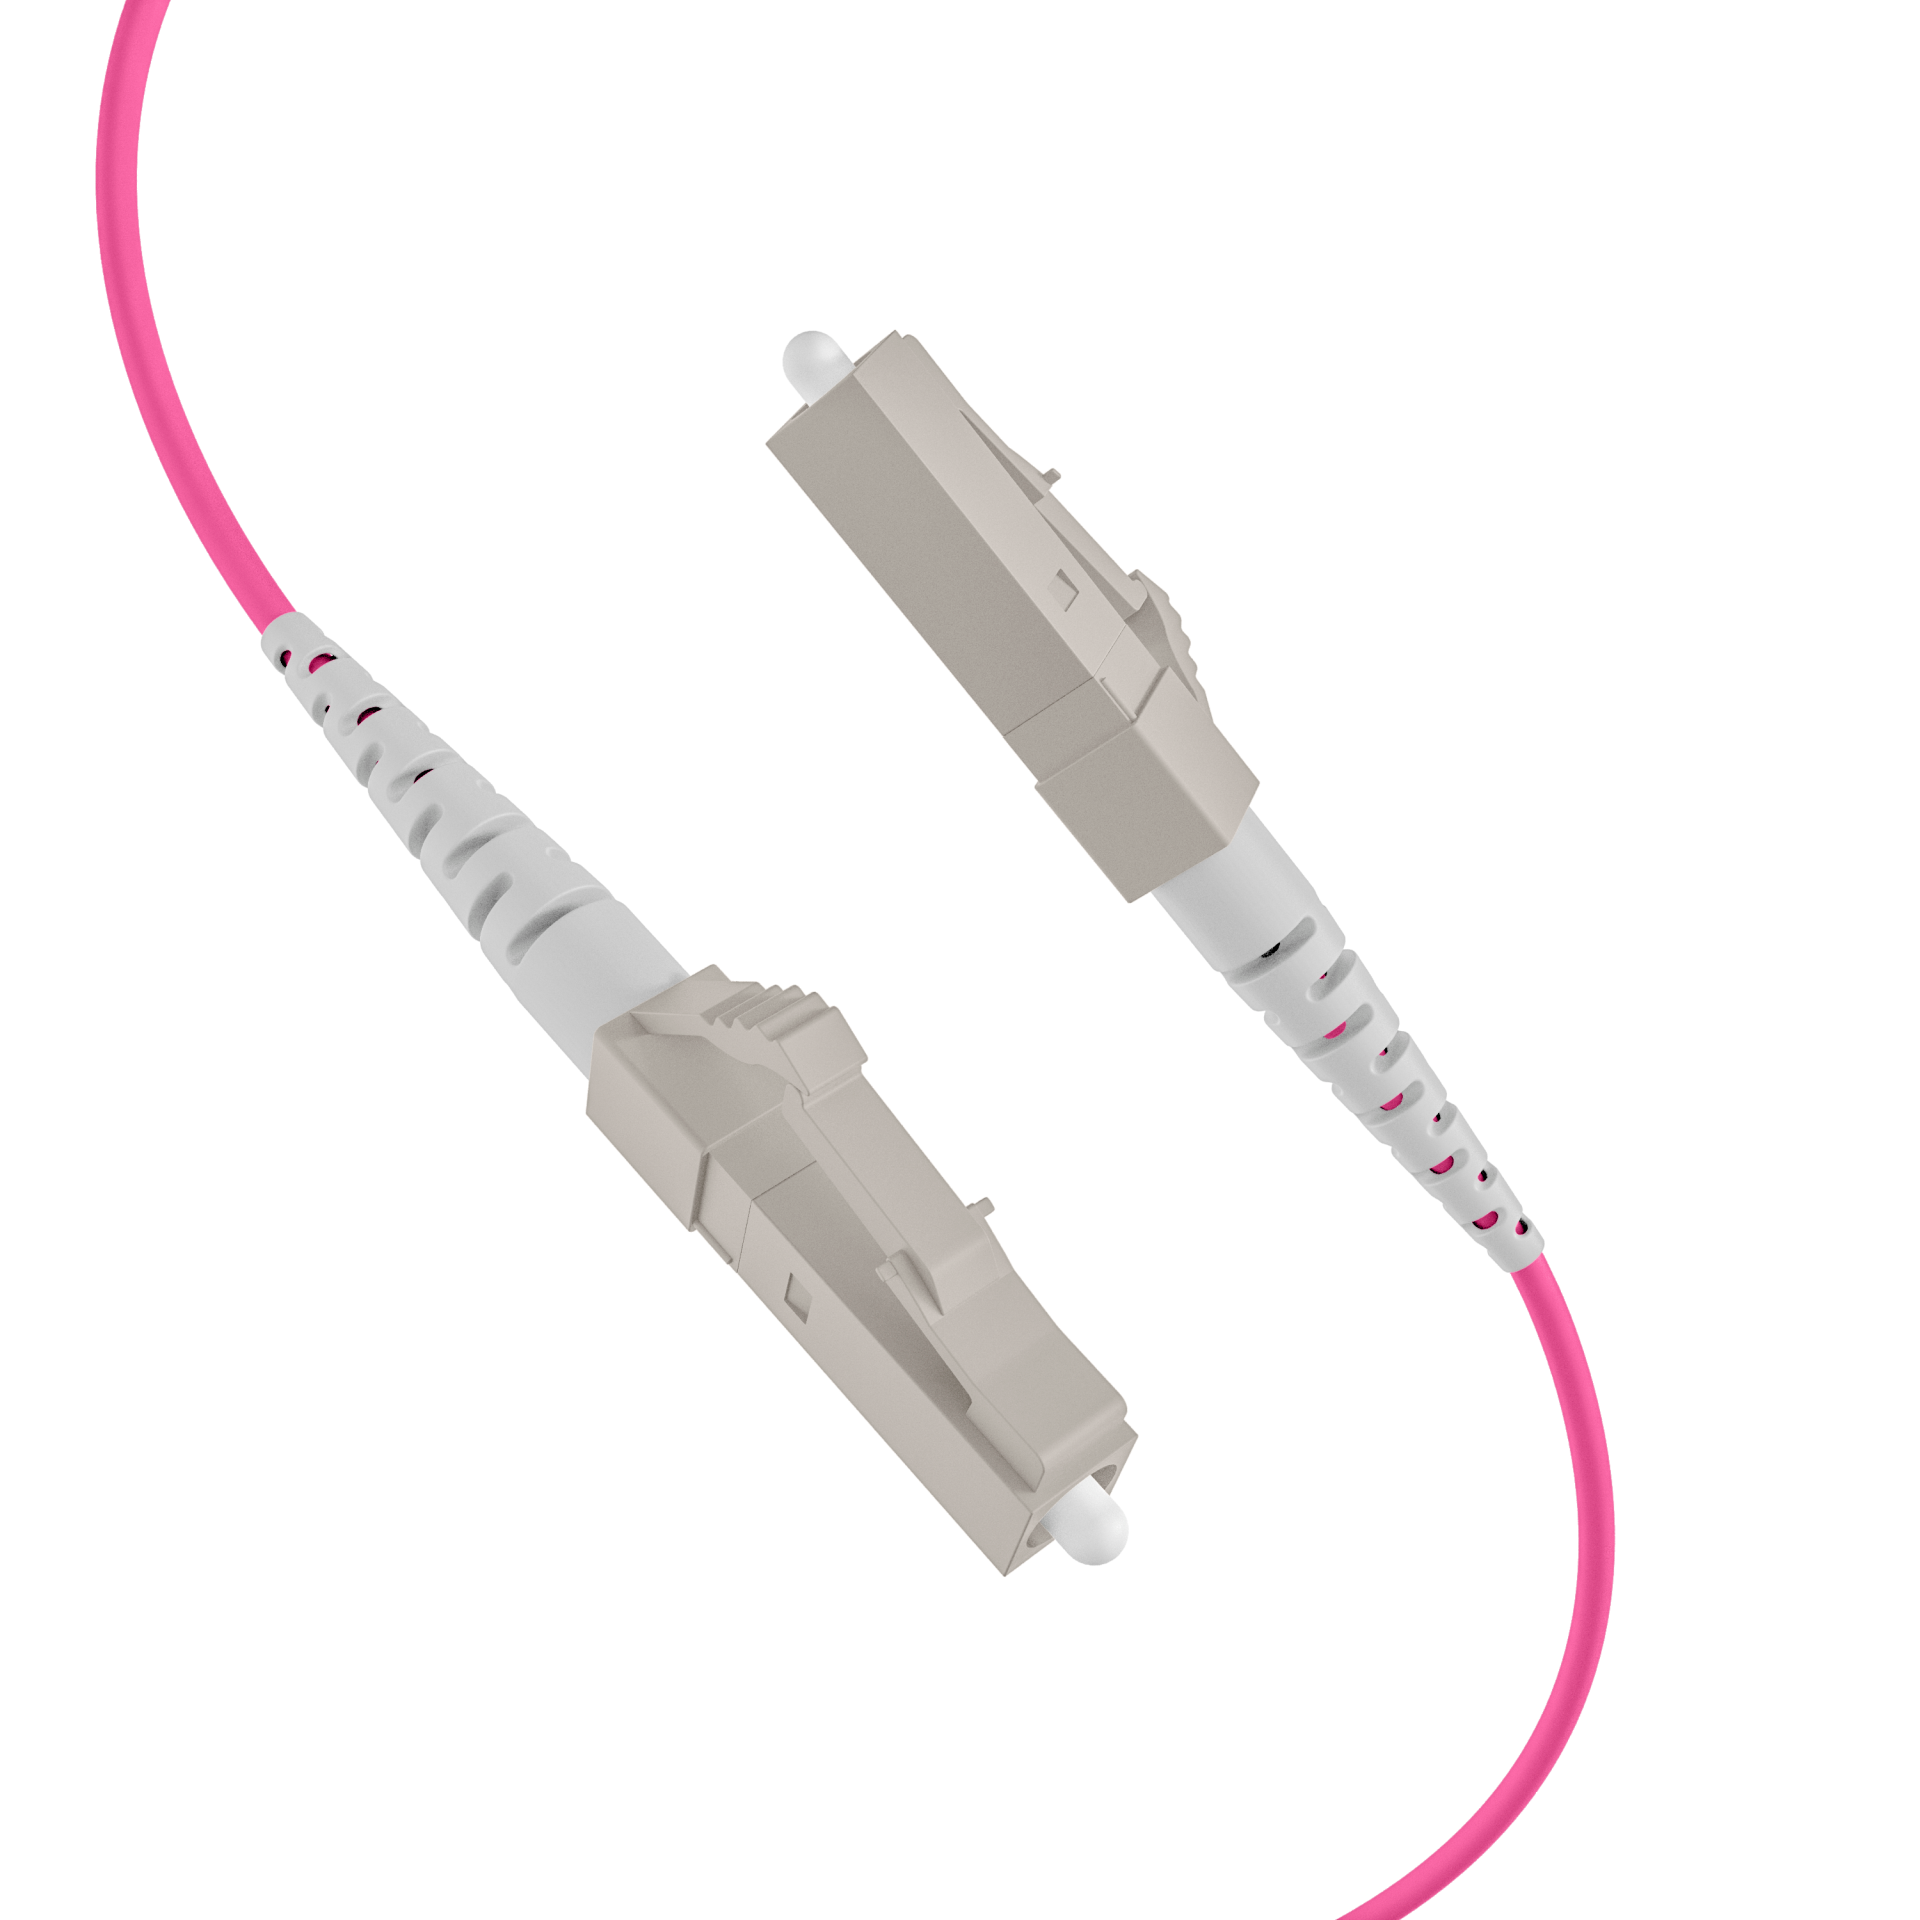 Trunkcable U-DQ(ZN)BH OM4 8G (1x8) LC-LC,200m Dca LSZH